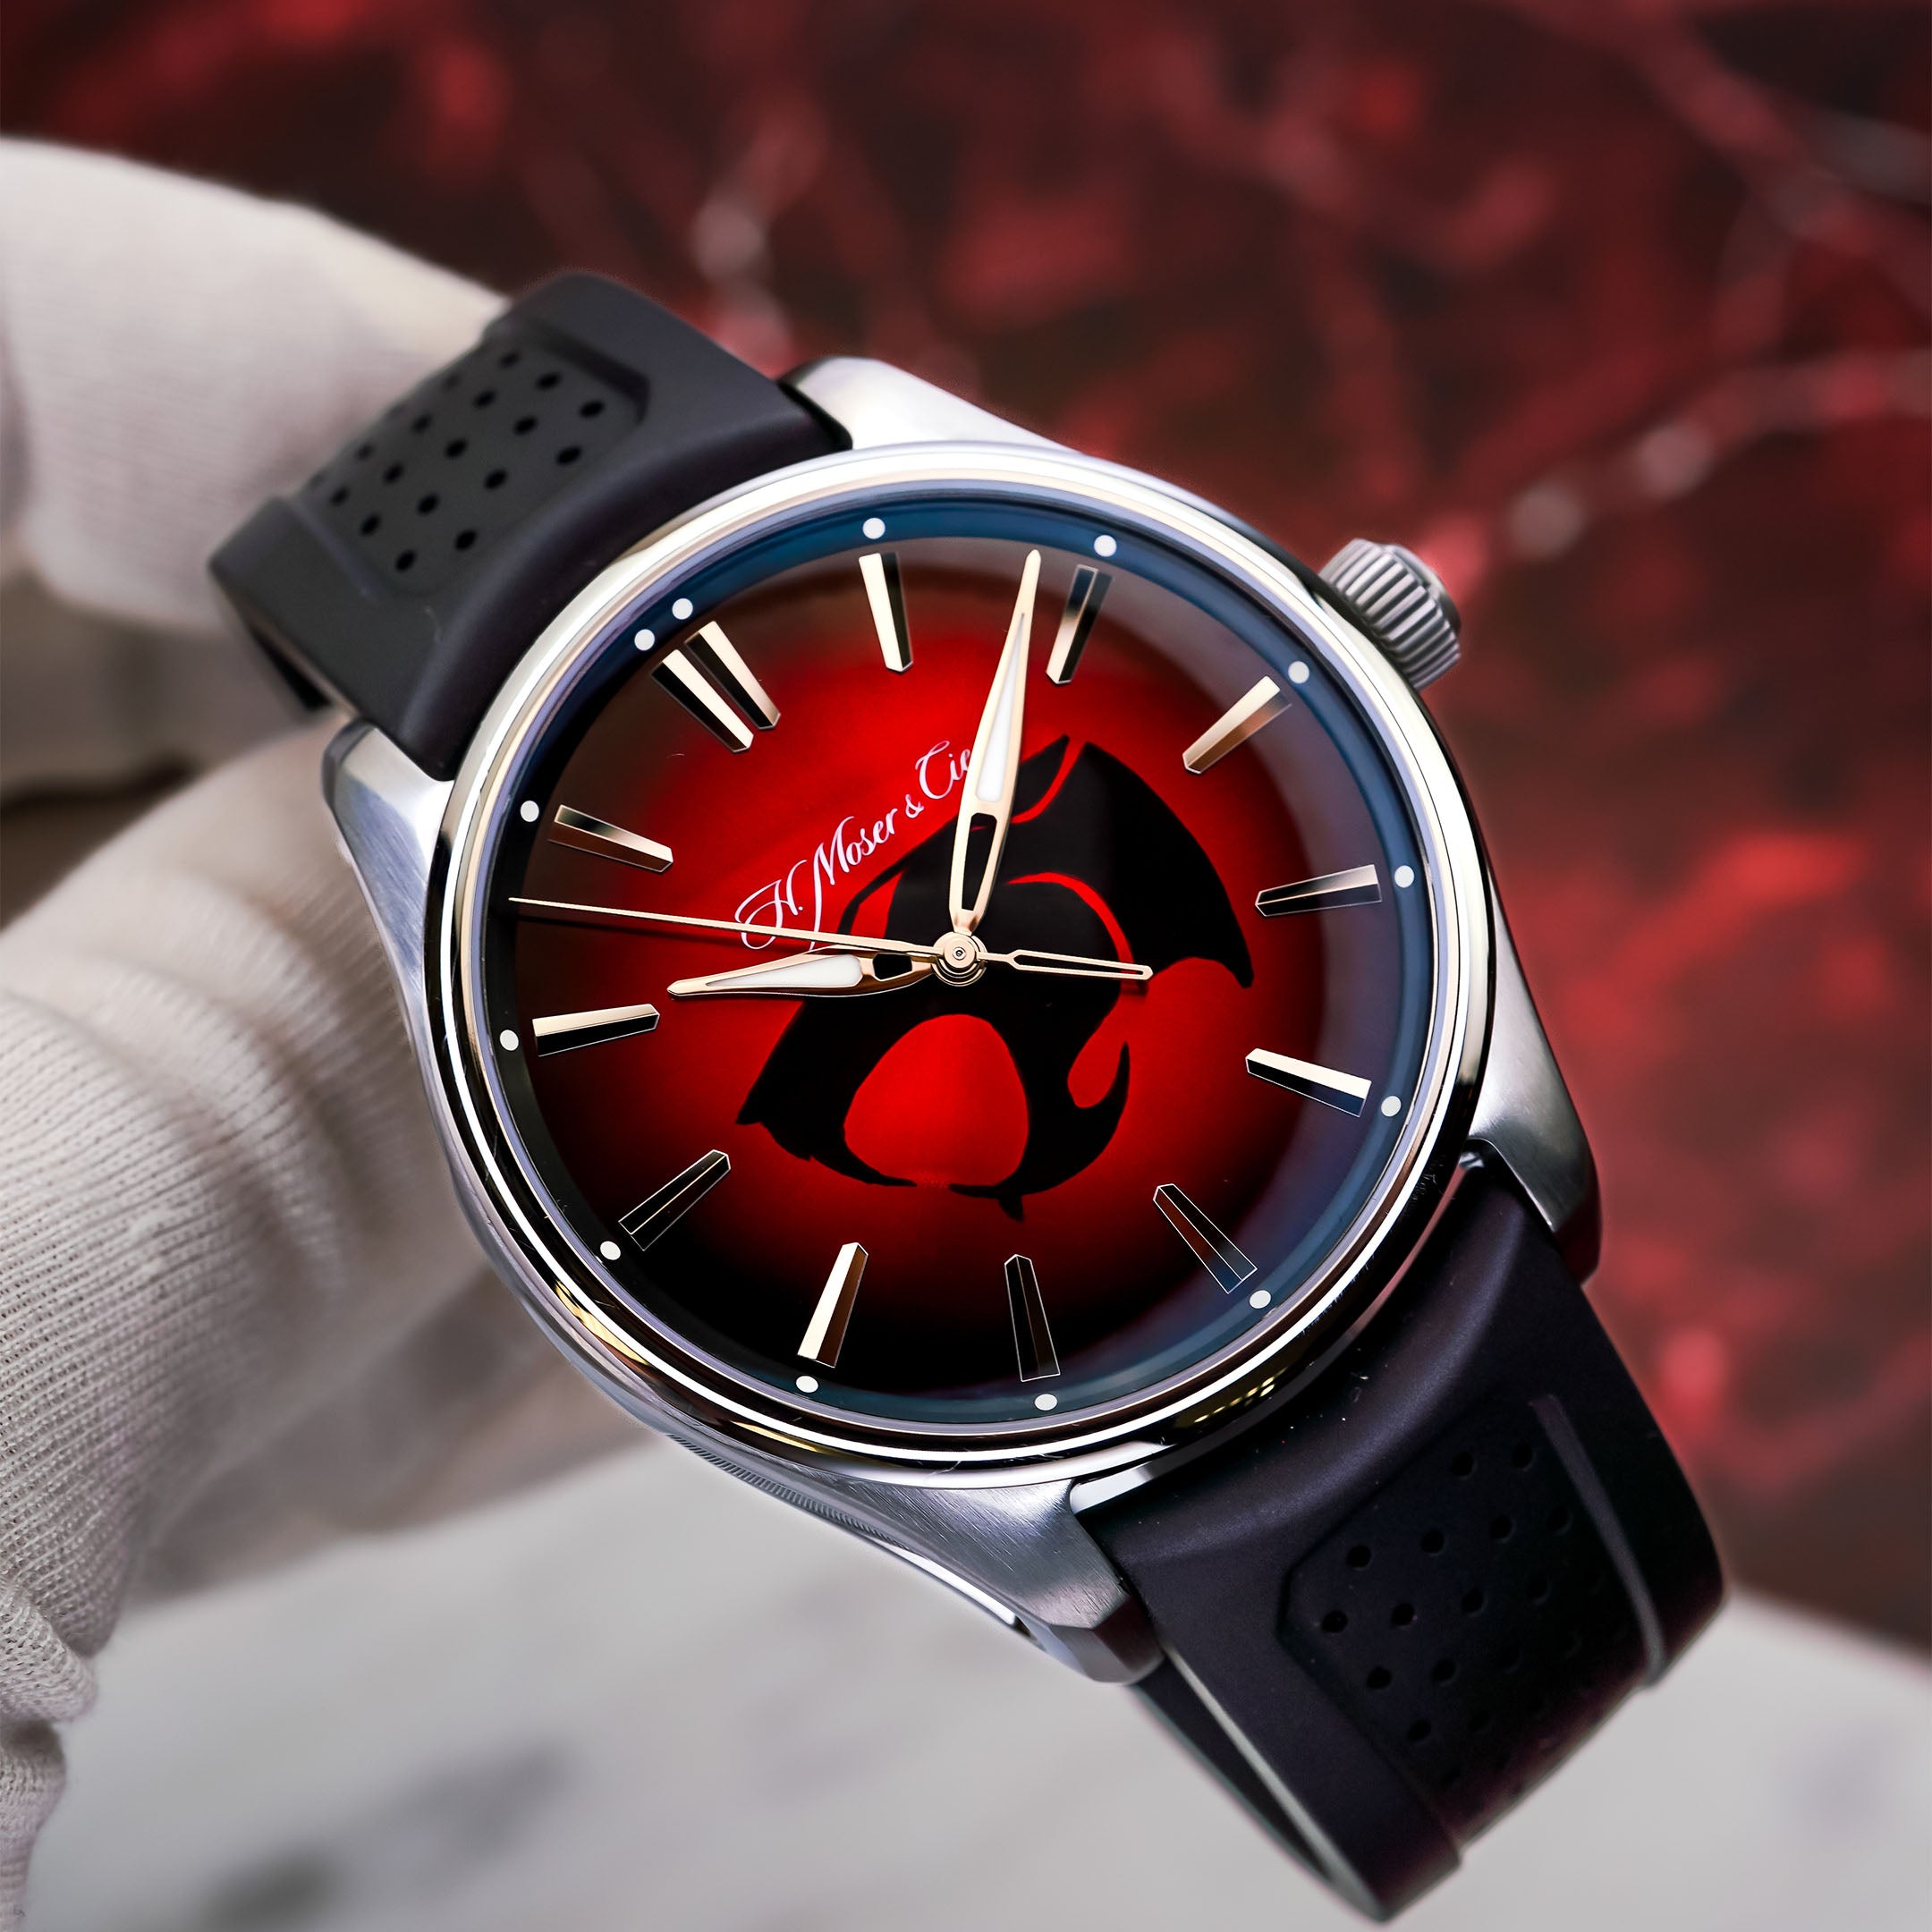 Custom-designed watch, a wearable work of art featuring hand-painted dial